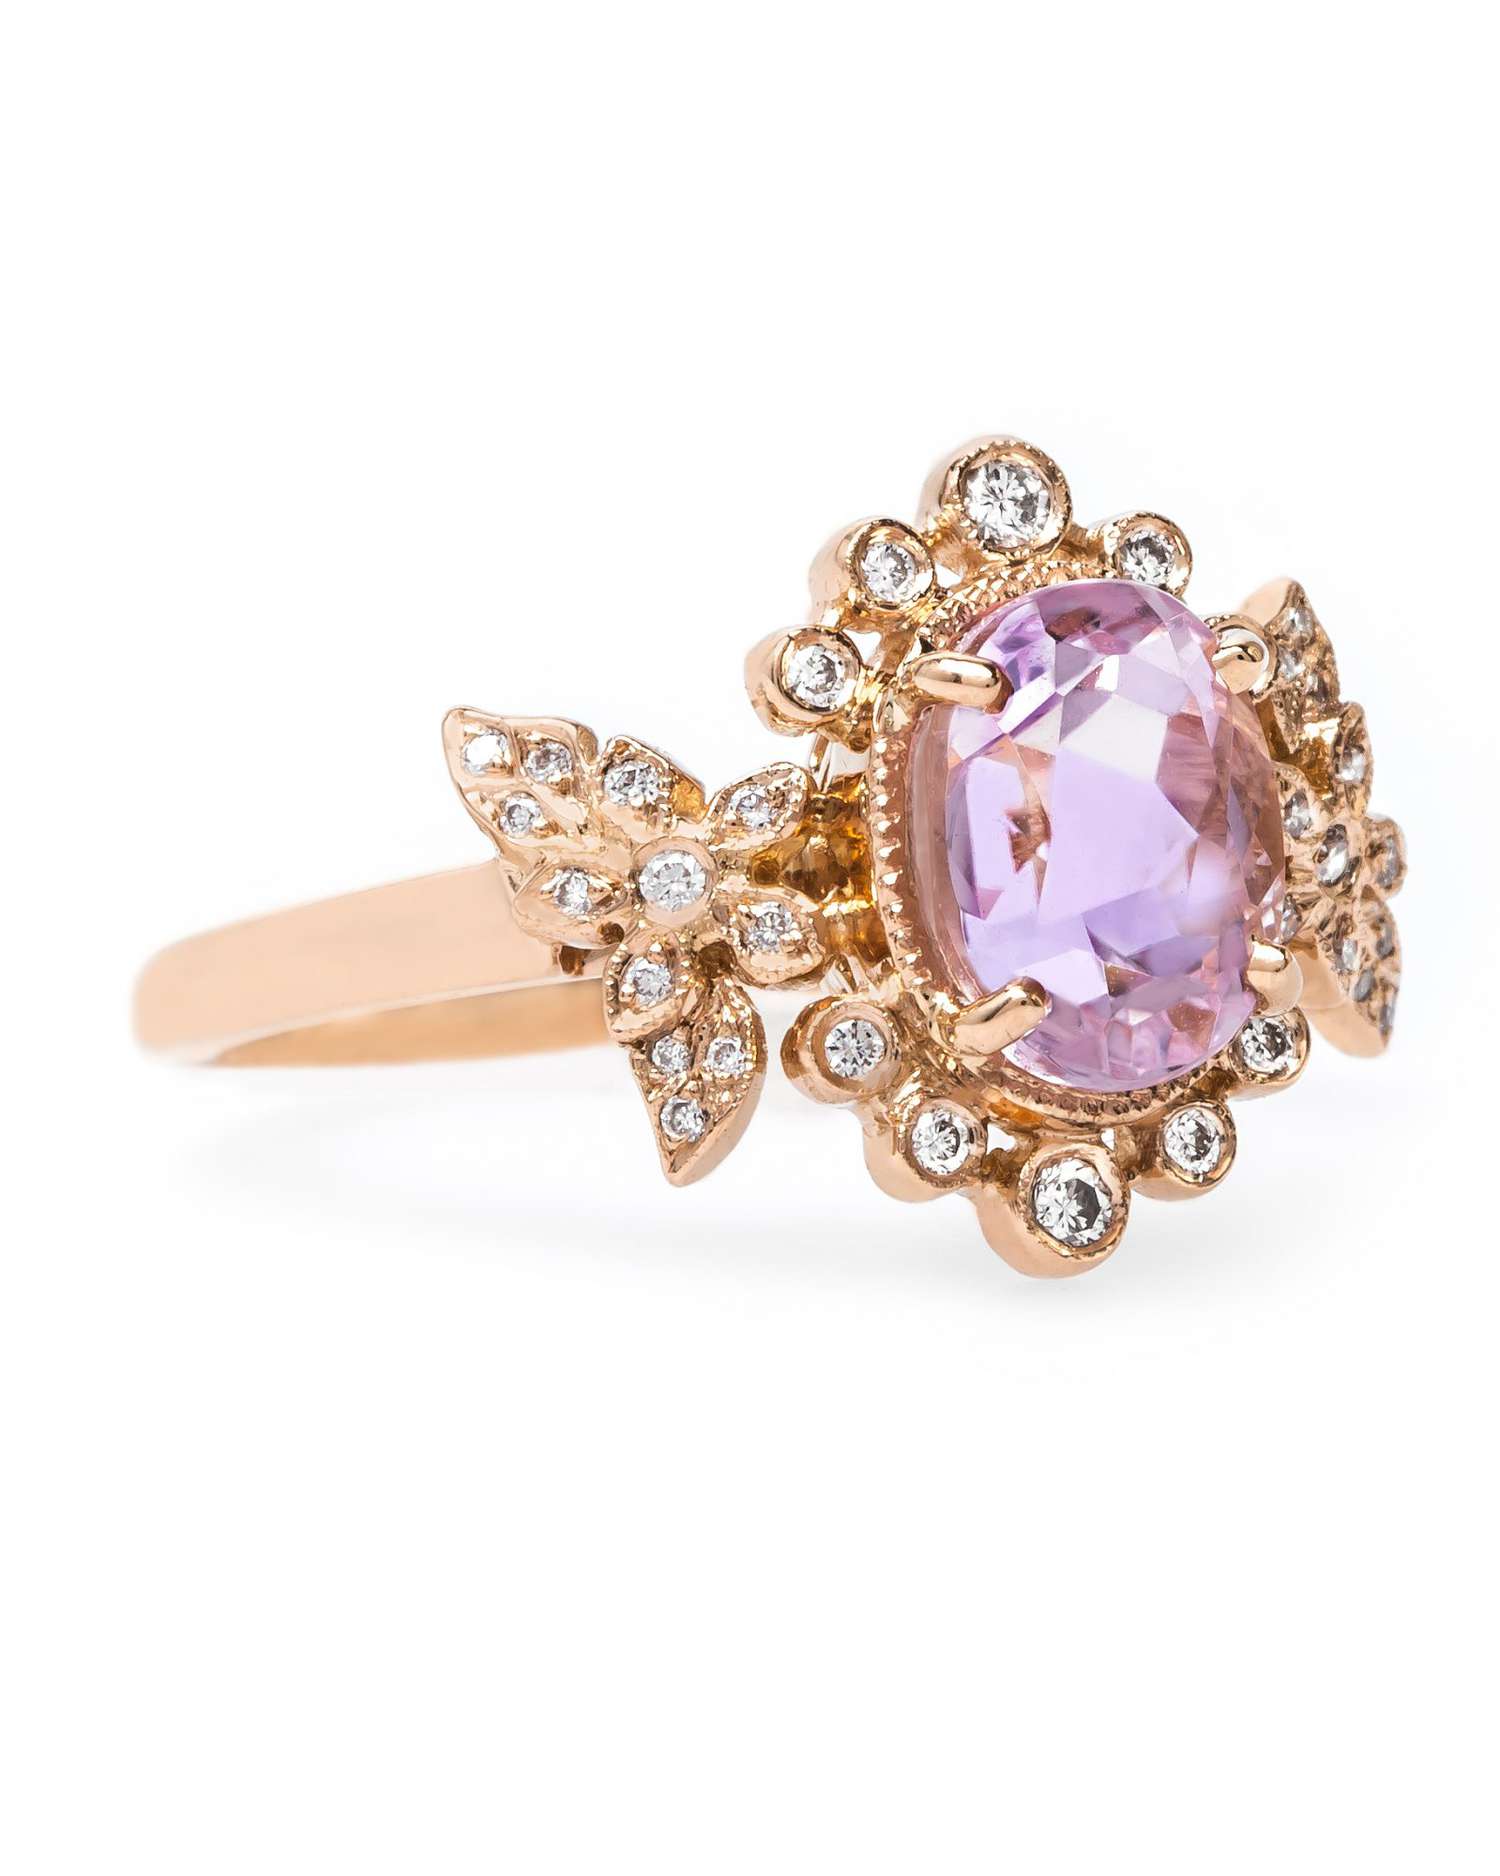 Gemstone Engraved Diamond And Gold Ring